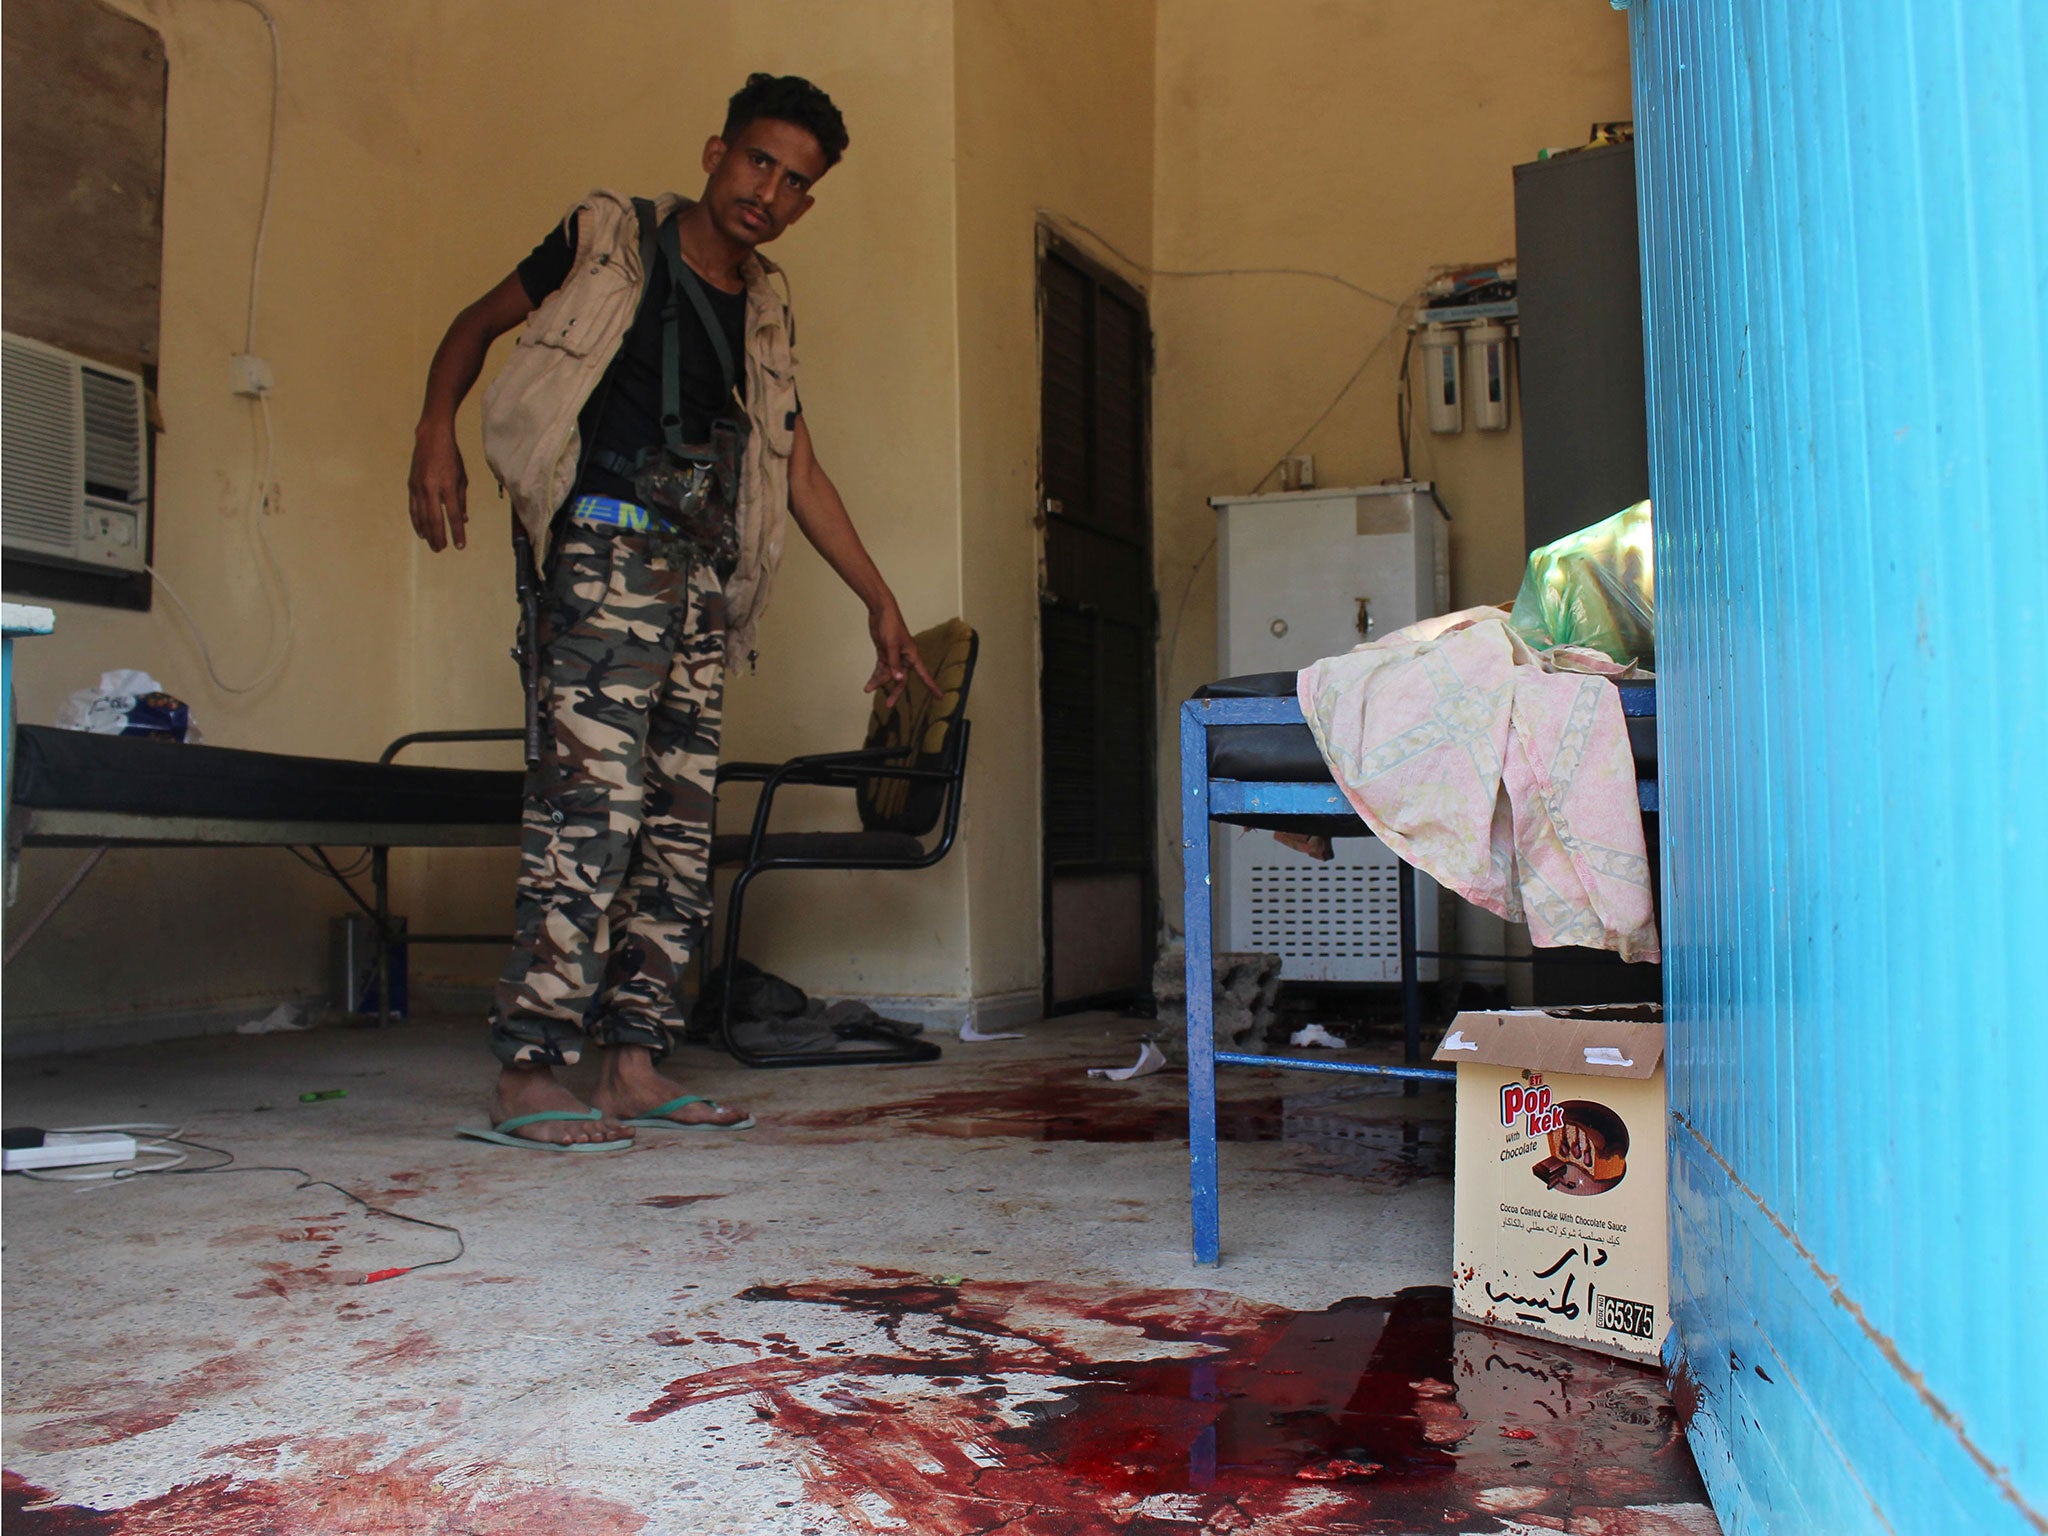 A Yemeni man inspects an elderly care home after it was attacked by gunmen in the port city of Aden, Yemen, Friday, 4 March, 2016.